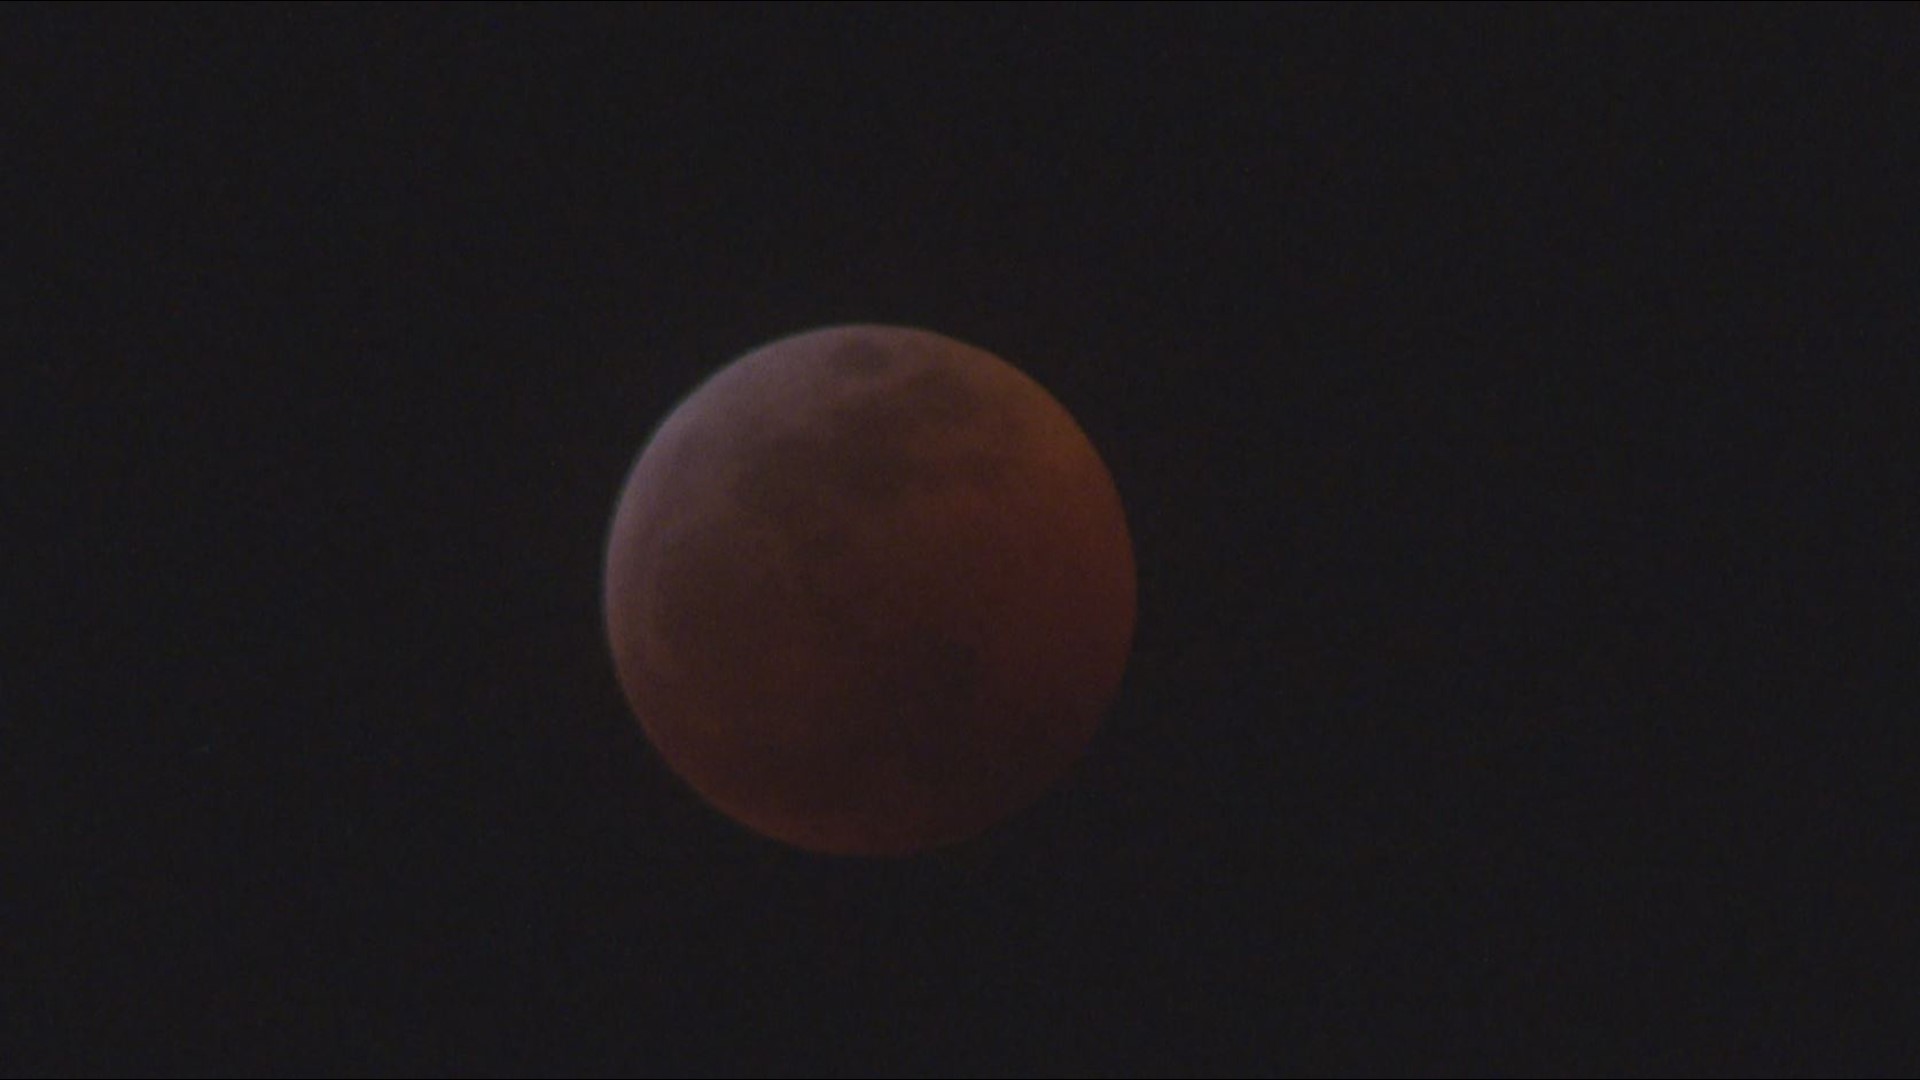 Footage of the Super Blood Wolf Moon on January 21, shot by Channel 6 Chief Photojournalist Rocky Bridges.